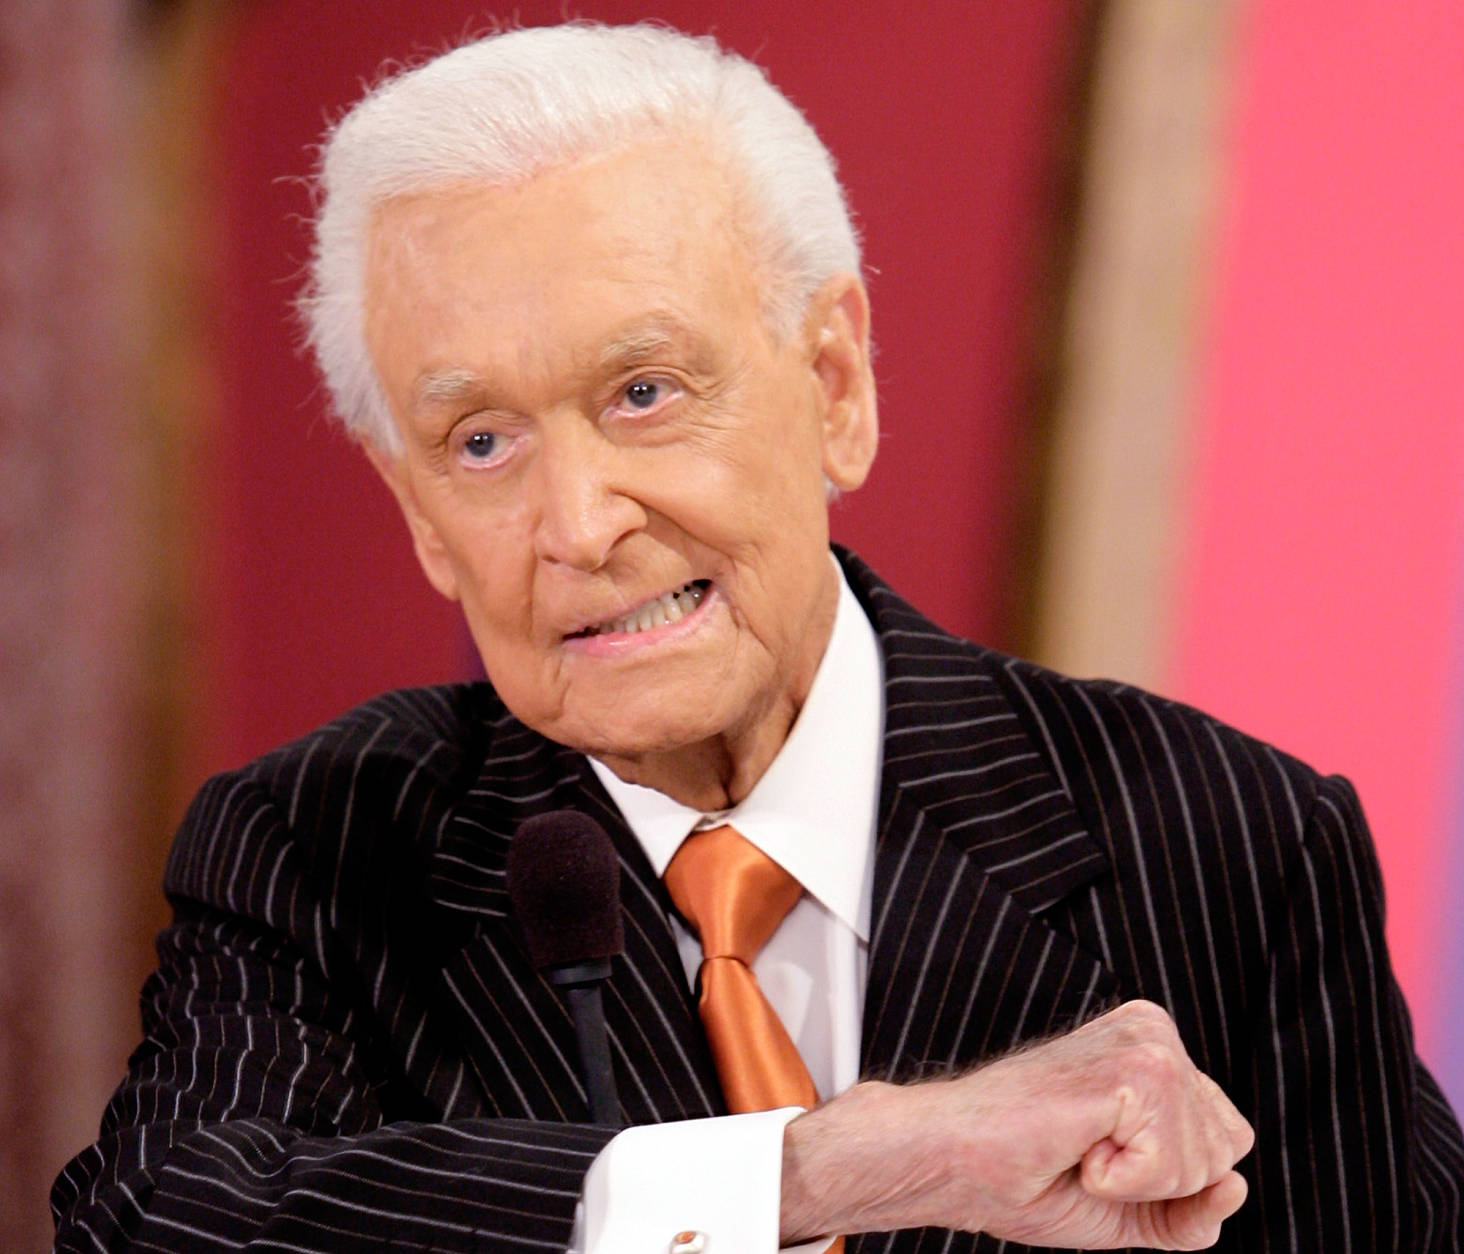 ** FILE **Television game show host Bob Barker gestures during live taping of "The Price Is Right" at the CBS Studios in Los Angeles, in this Oct.2006 file photo. A woman has sued Bob Barker and the producers of "The Price is Right," alleging she was forced to quit working on the game show. (AP Photo/Damian Dovarganes, file)